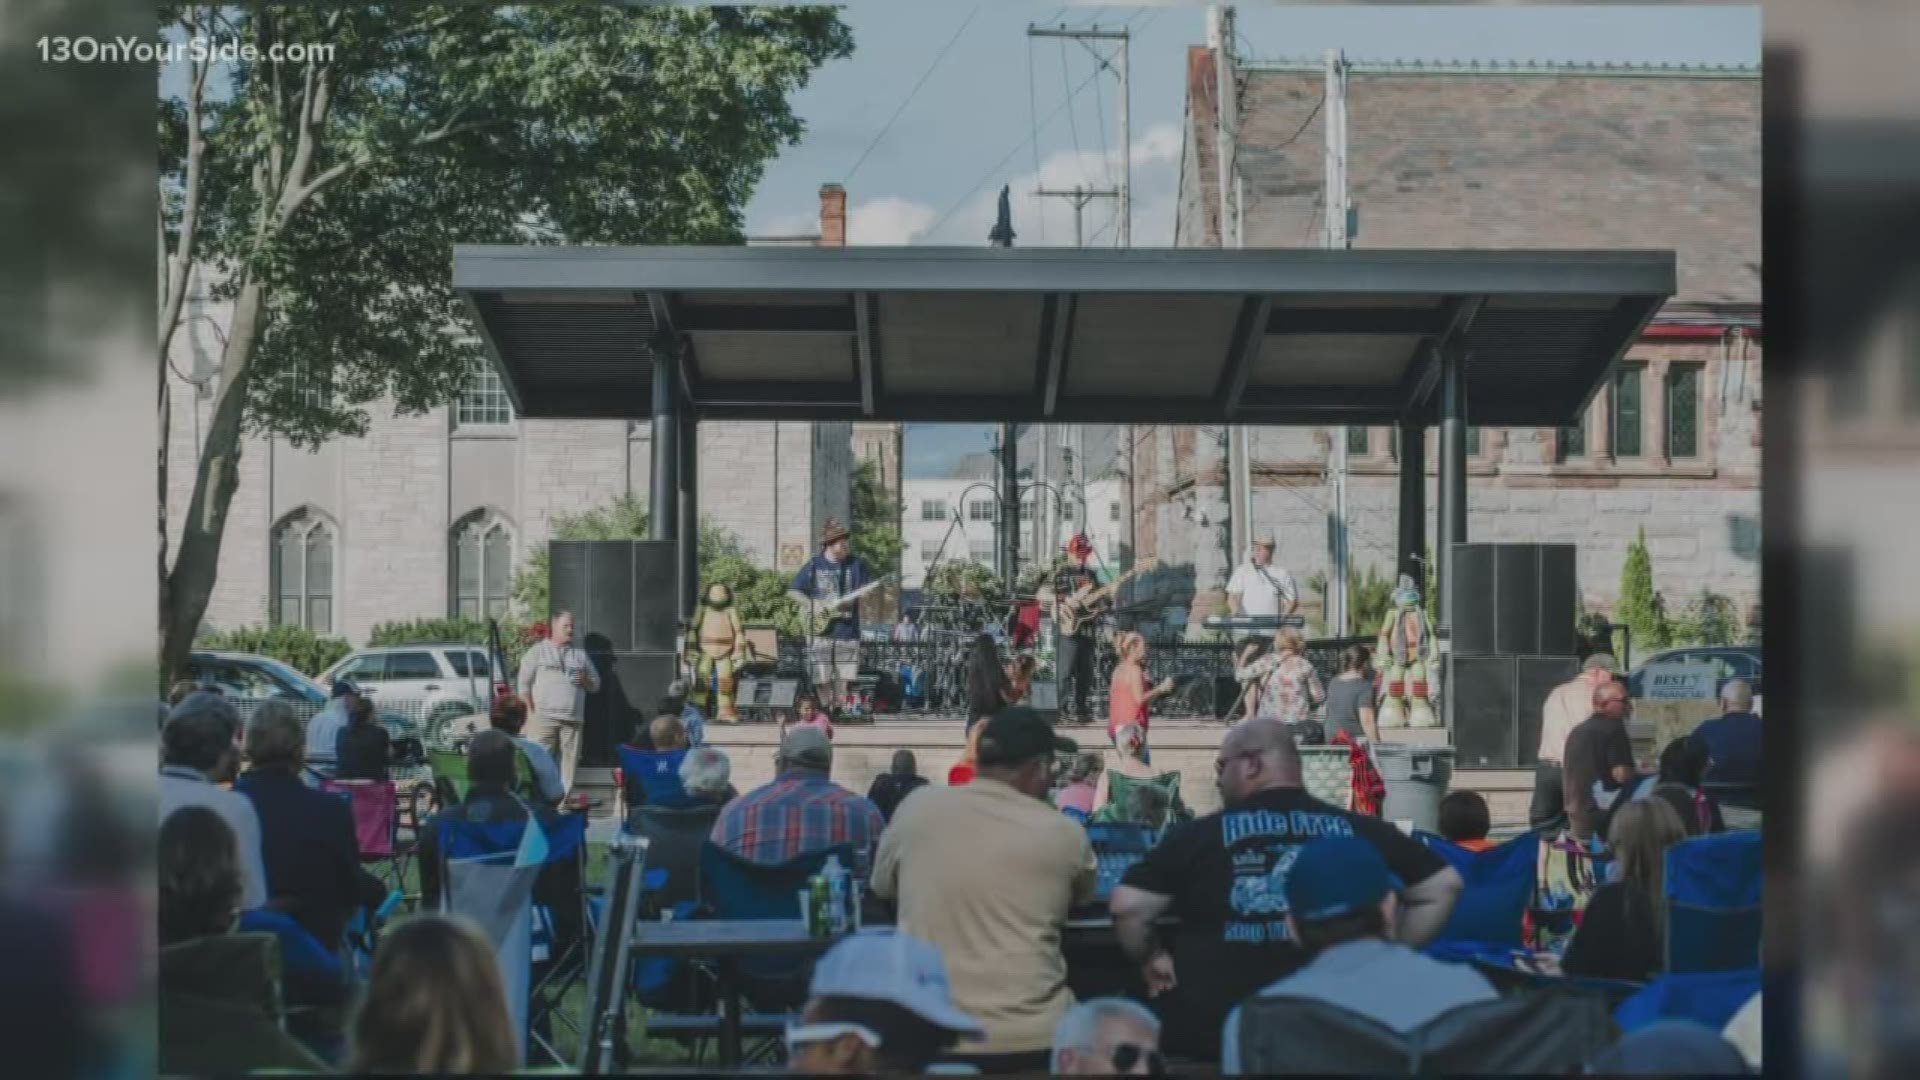 Muskegon Parties in the Park canceled for 2020